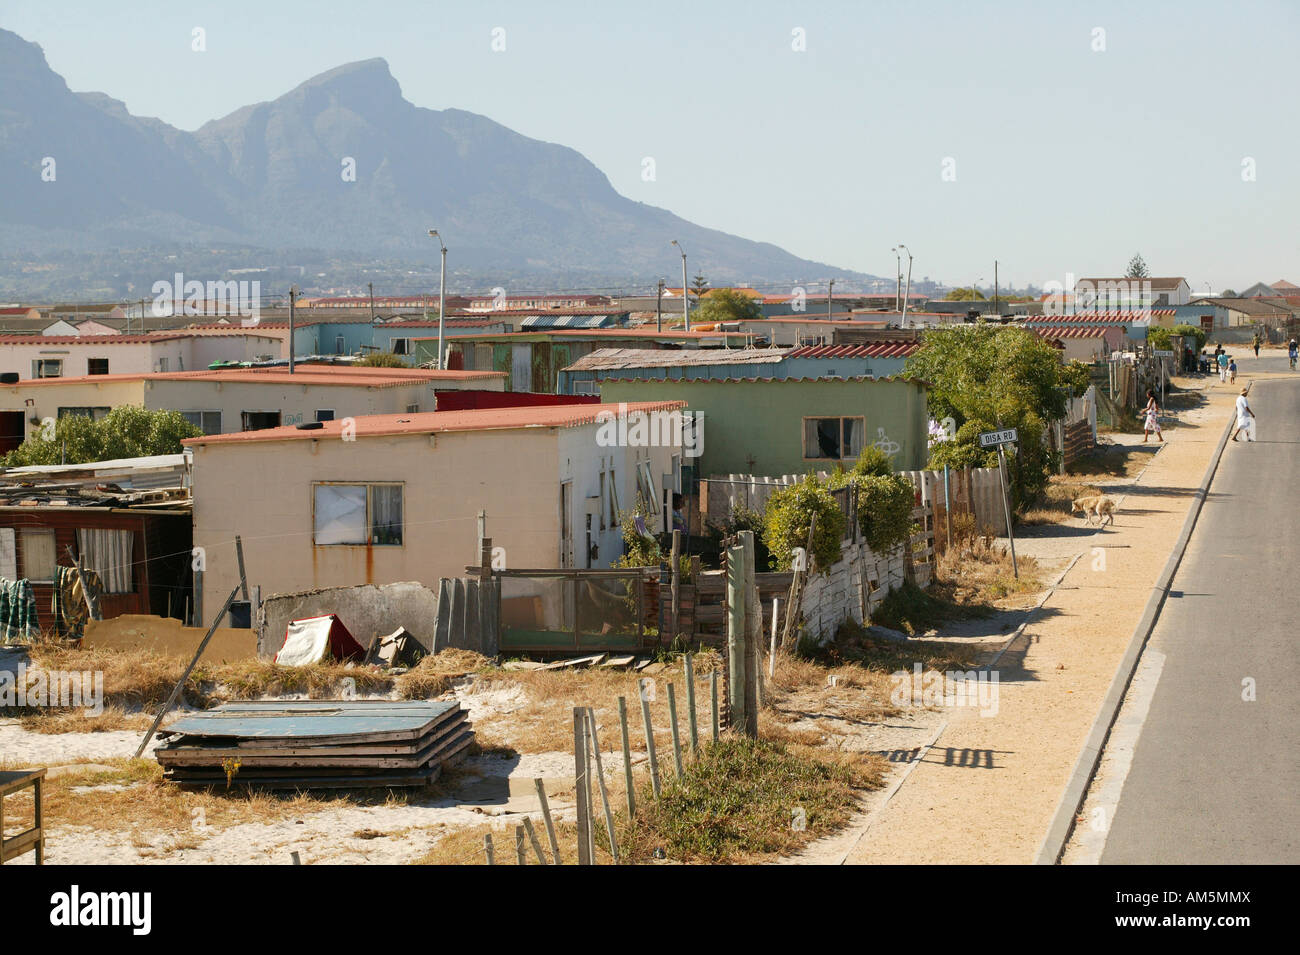 Township in Cape Town, South Africa Stock Photo